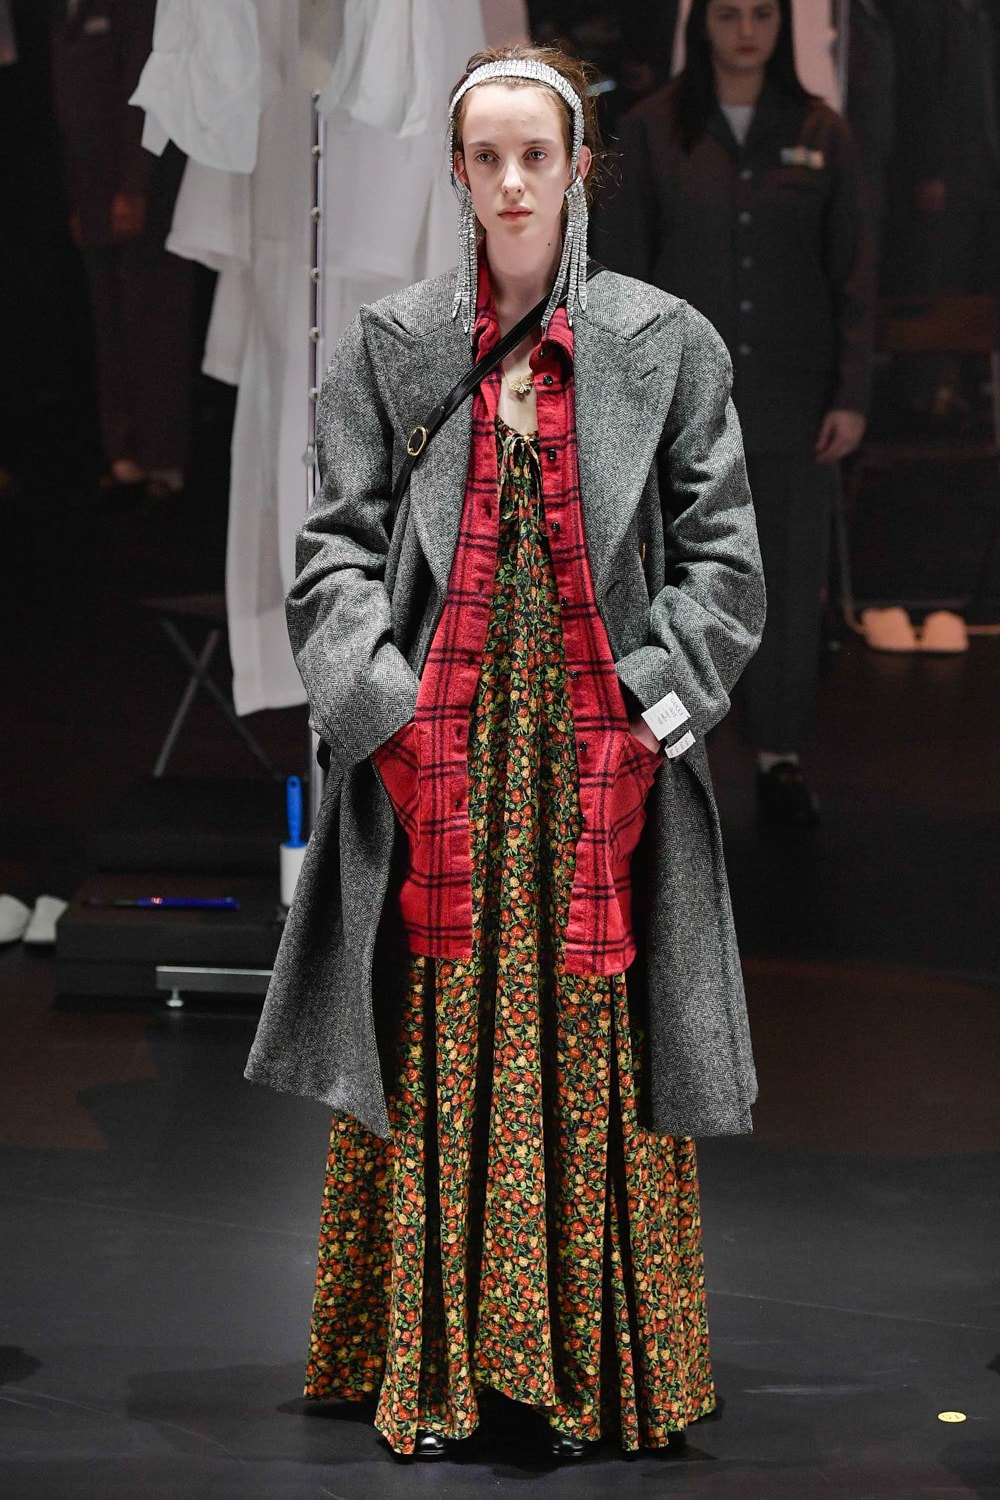 Gucci Fall/Winter 2020 Collection Runway Show Coat Grey Floral Dress